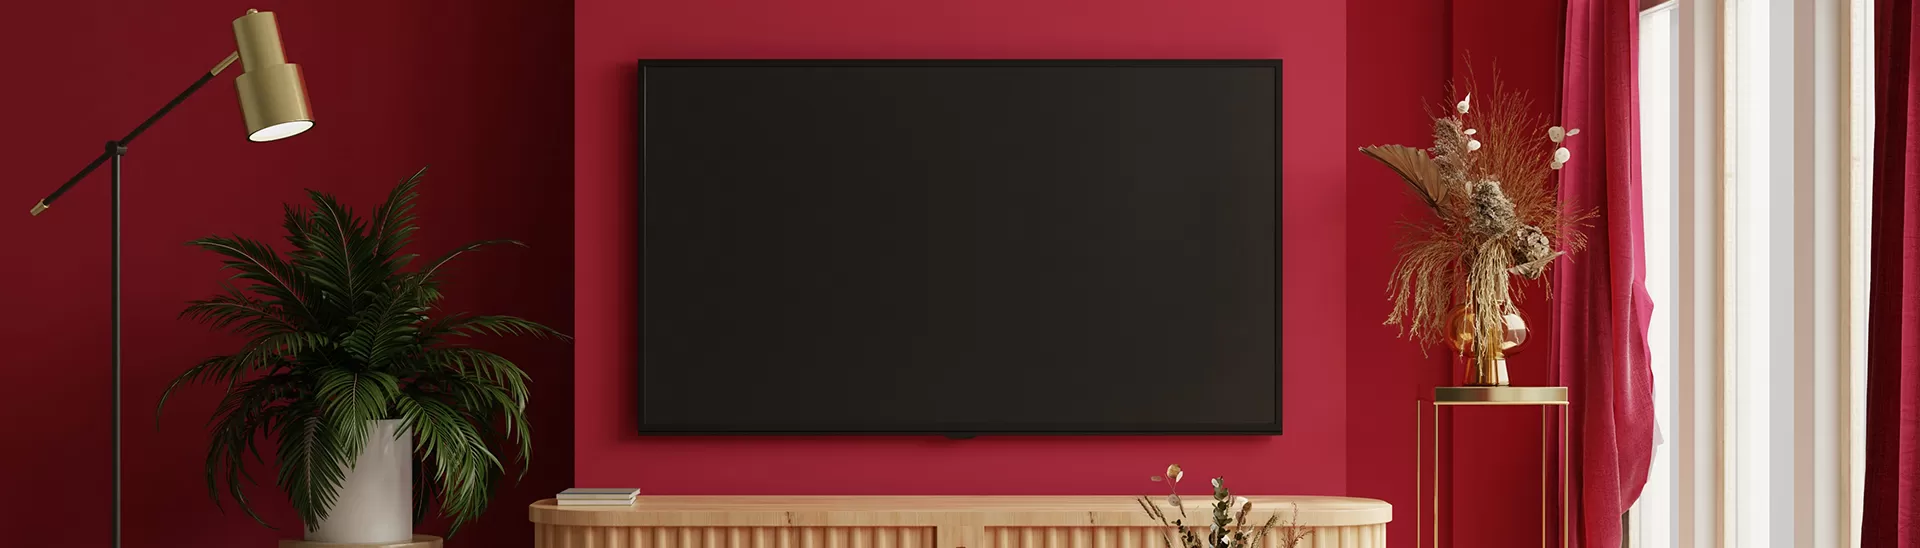 Transform Your Living Room With The Perfect TV Wall Colour